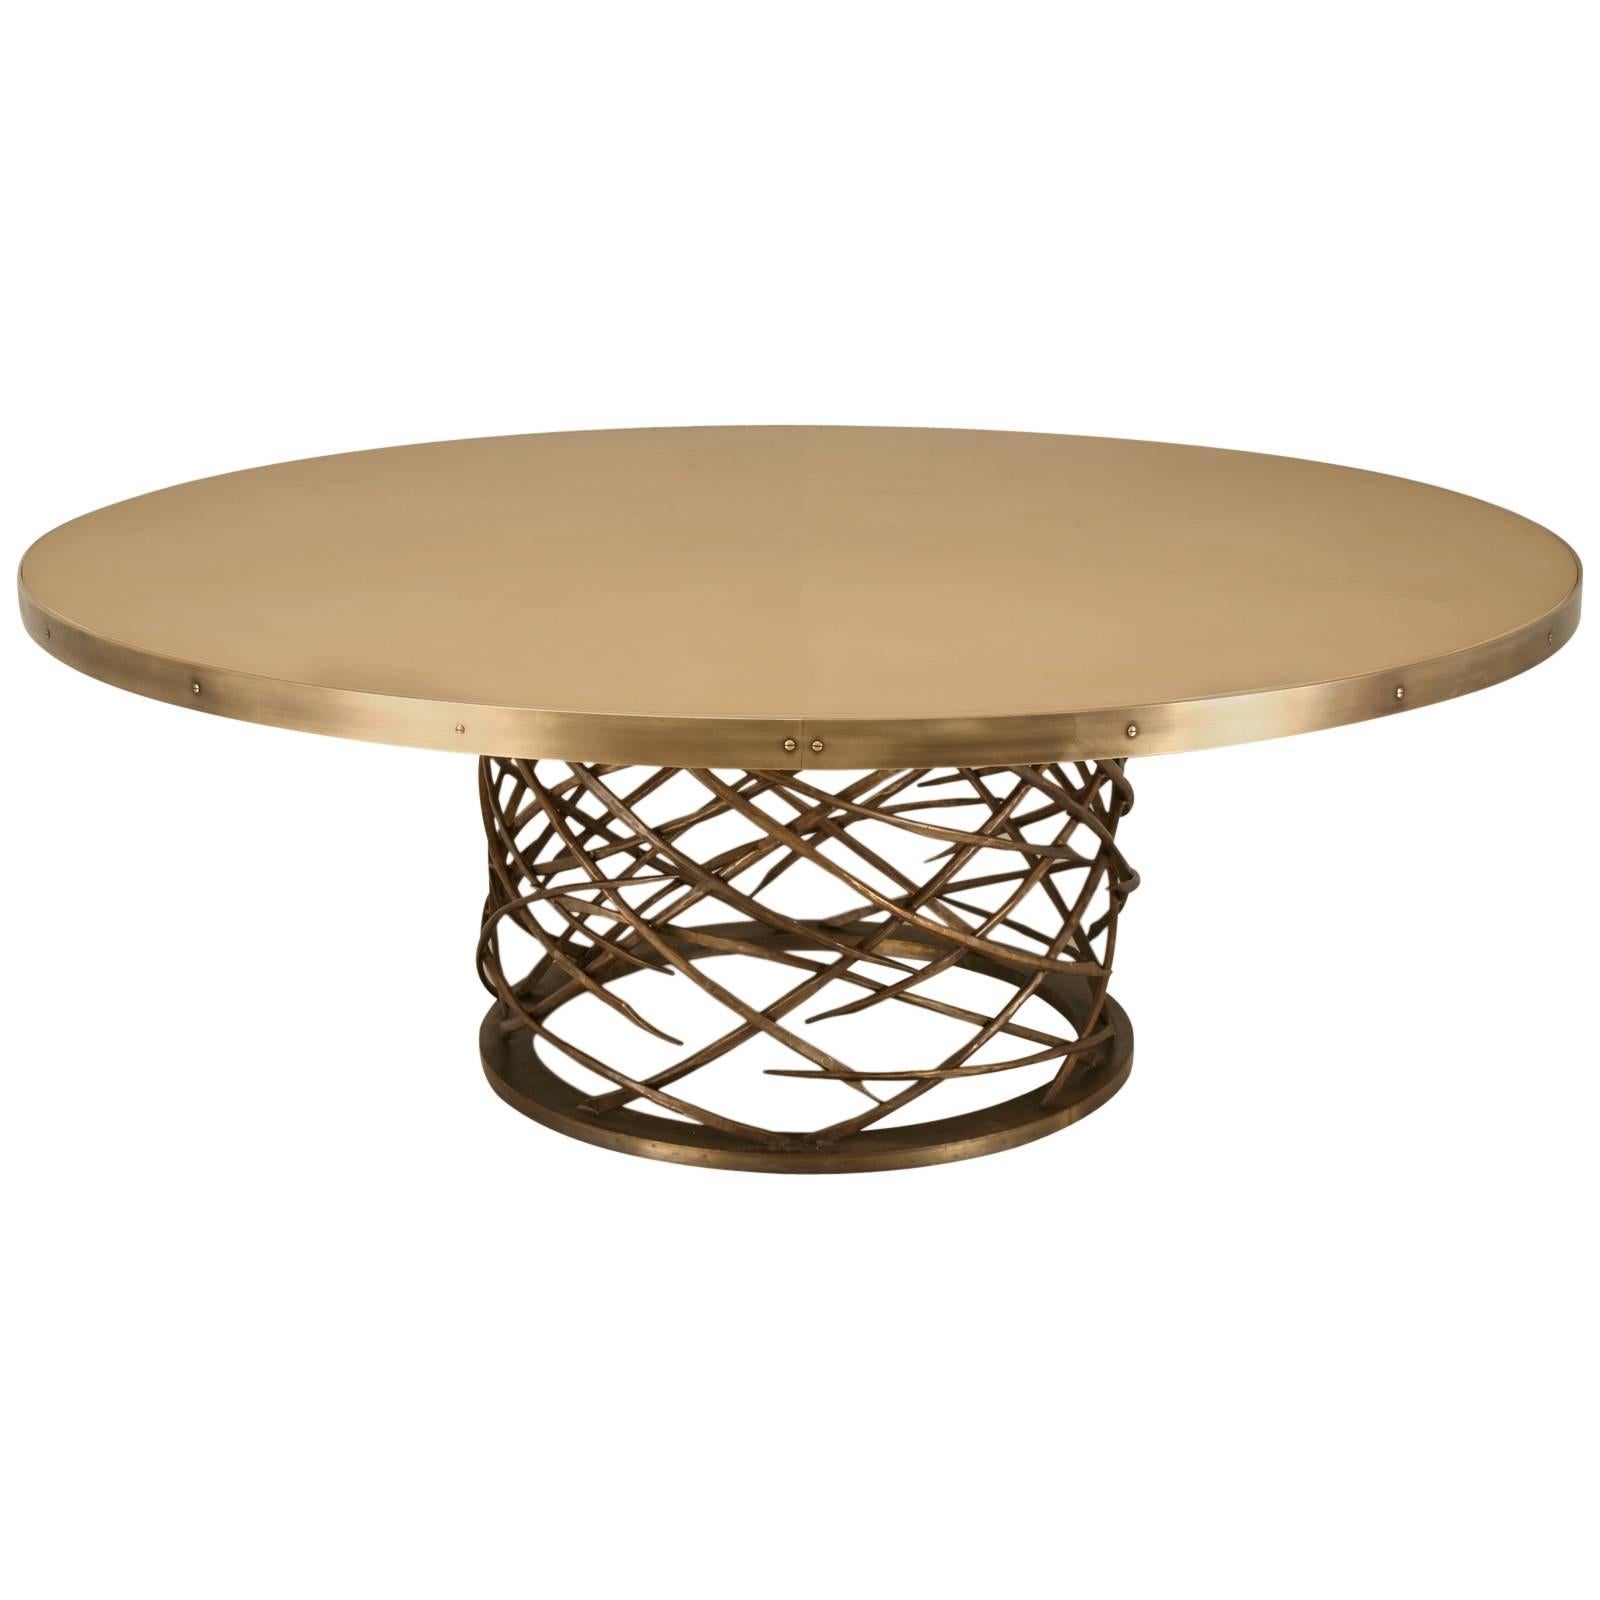 Custom-Made Woven Solid Bronze Dining Table or Center Hall Table Made to Order For Sale